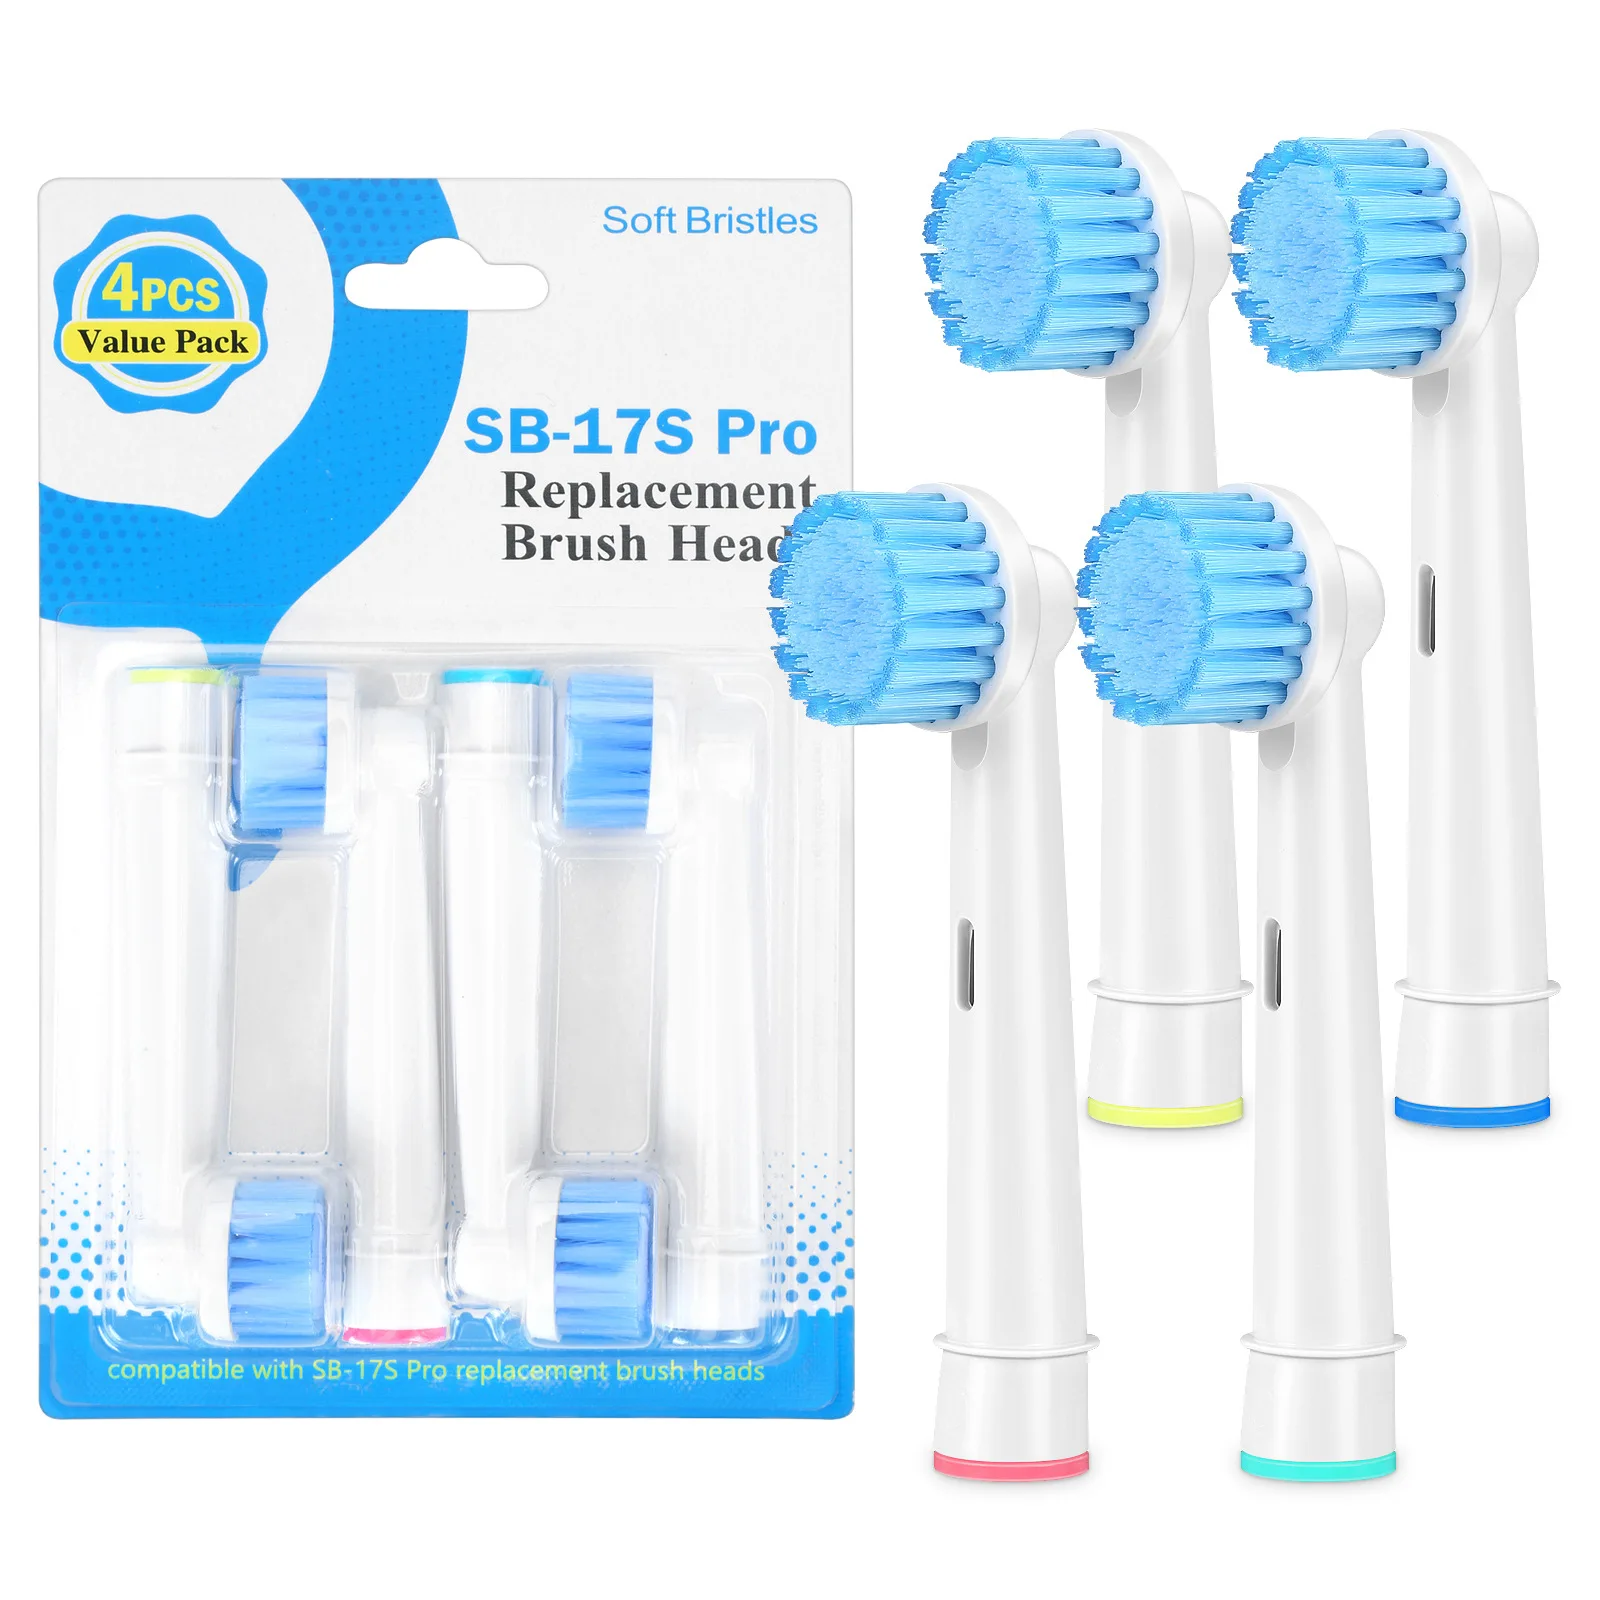 4 Pcs/Pack Replacement Brush Heads For Oral B Electric Toothbrush Head Soft Dupont Bristle Teeth Cleaning & Whitening Brush Head 10 pcs pack replacement brush heads for seago fairywill electric toothbrush dupont bristle brush refill efficient tooth cleaning